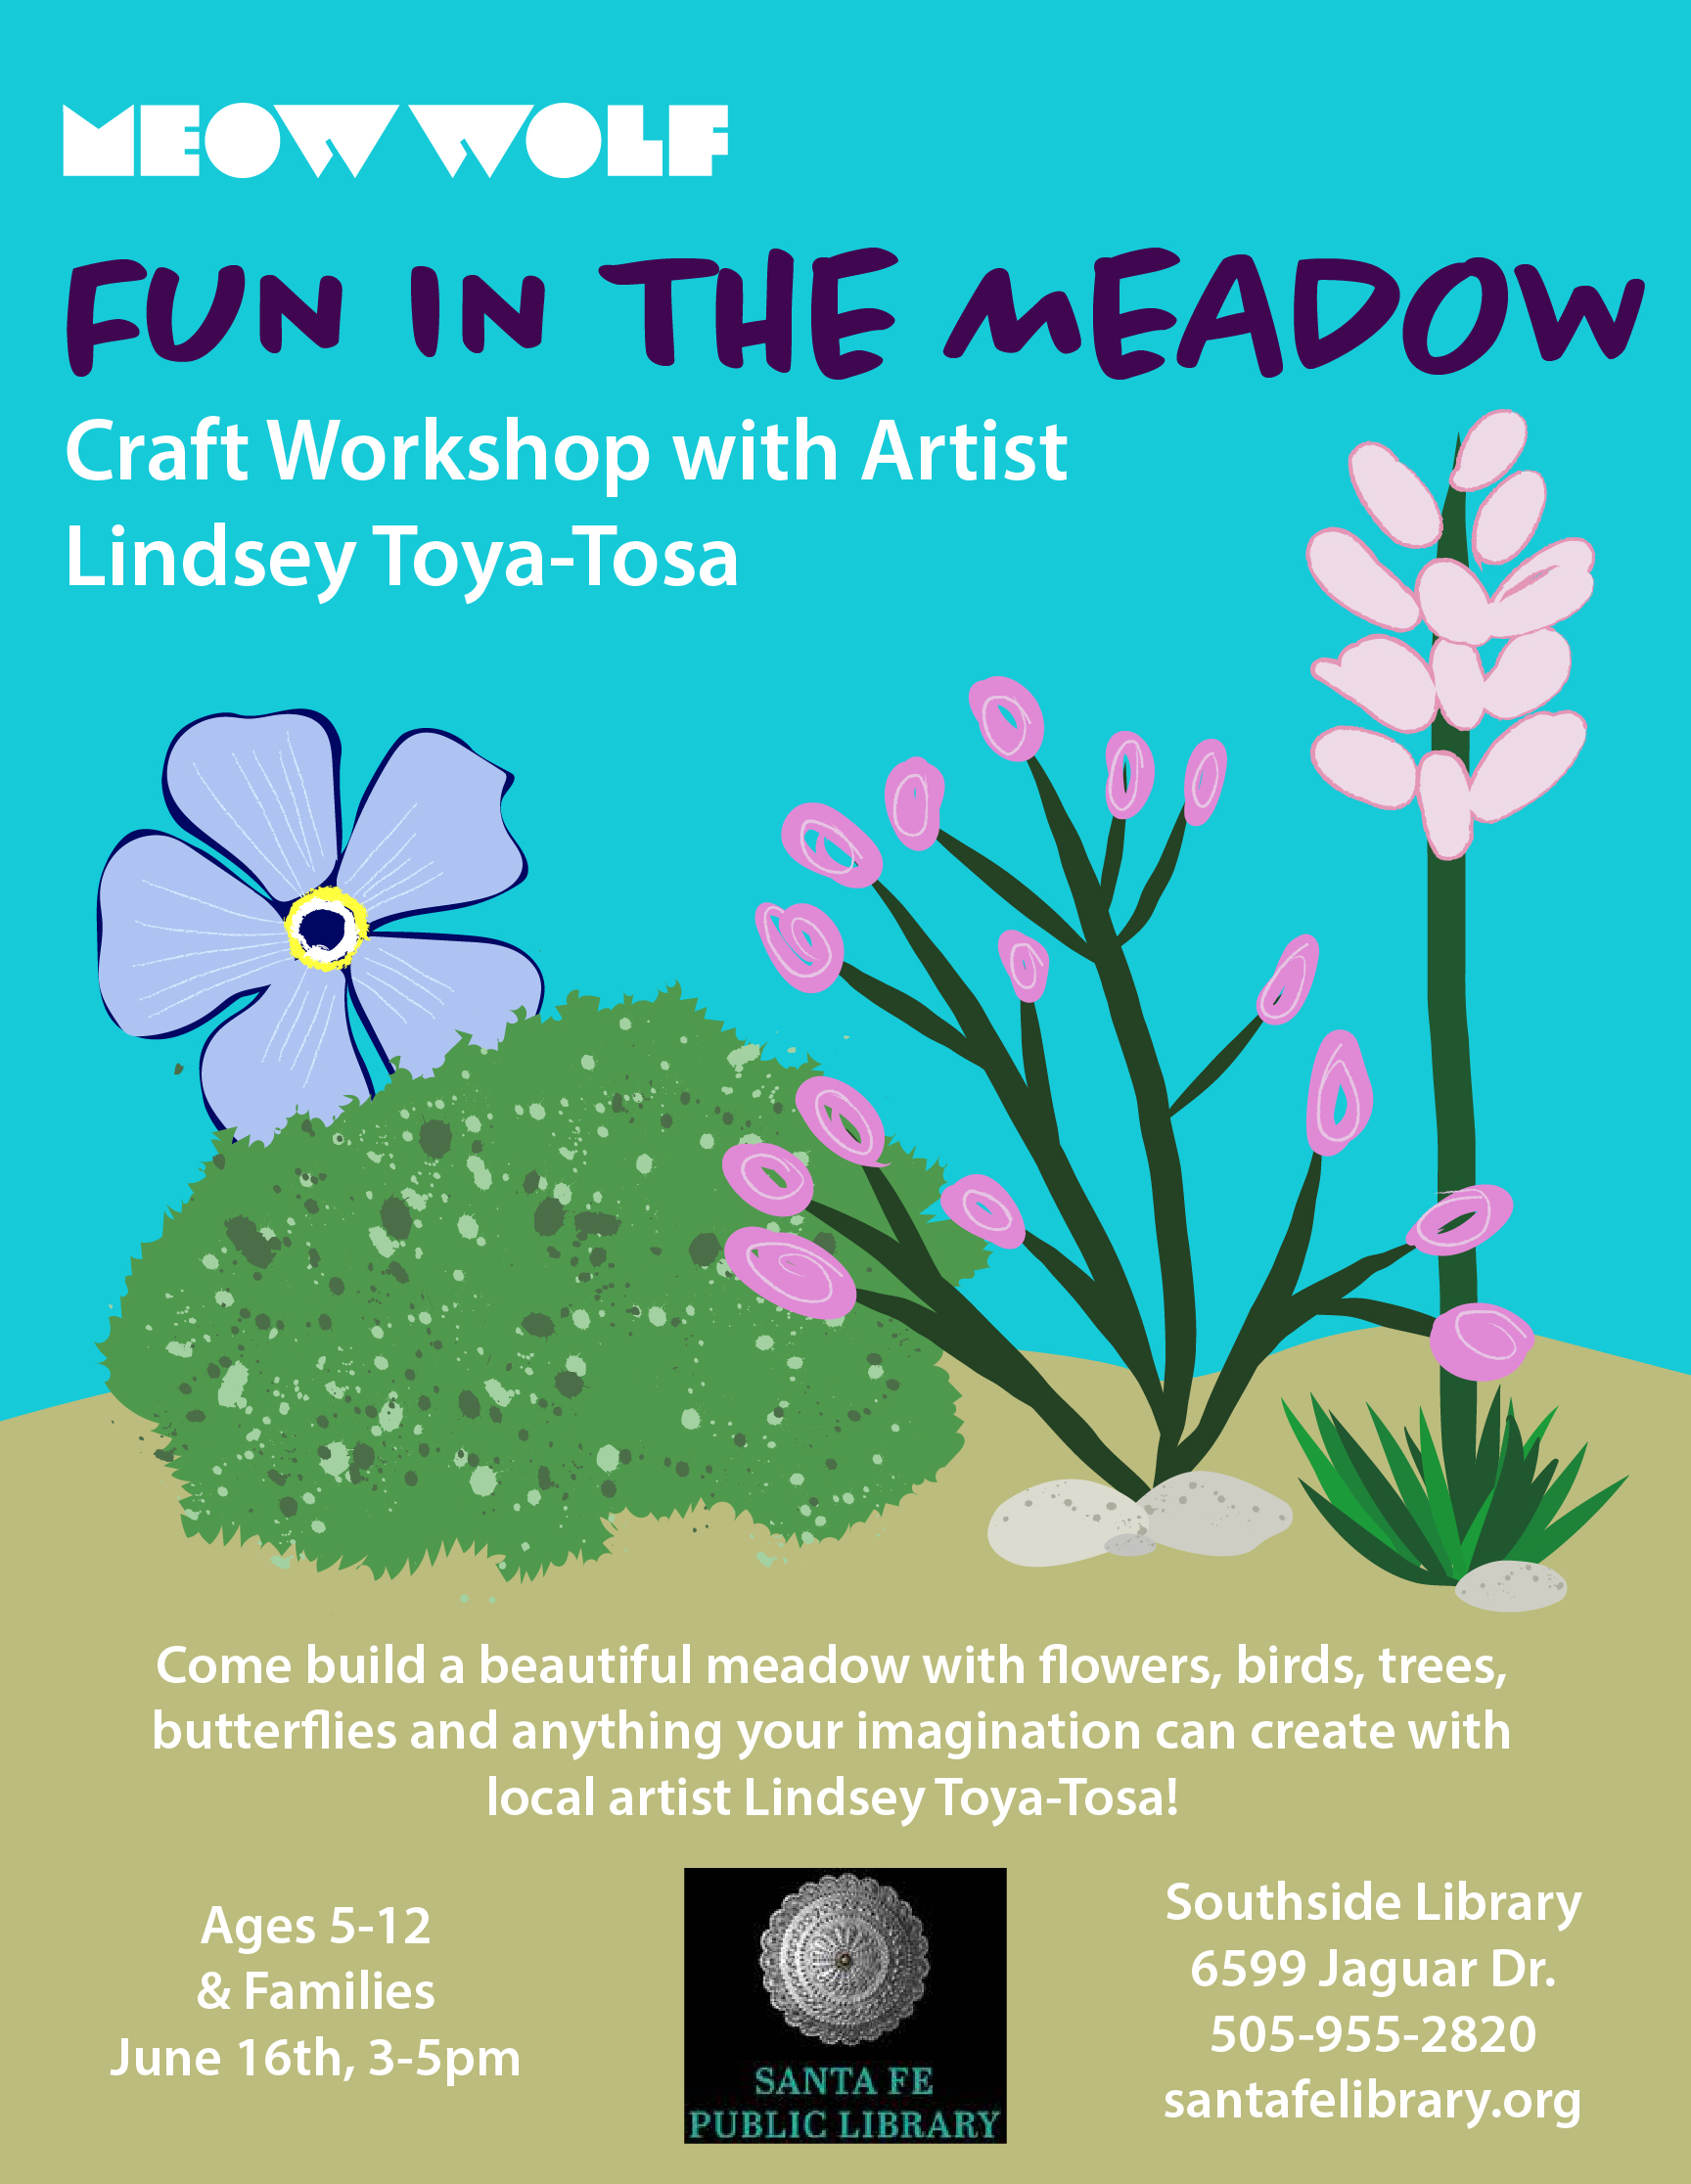 Fun in the meadow Craft workshop with Lindsey Toya-Tosa